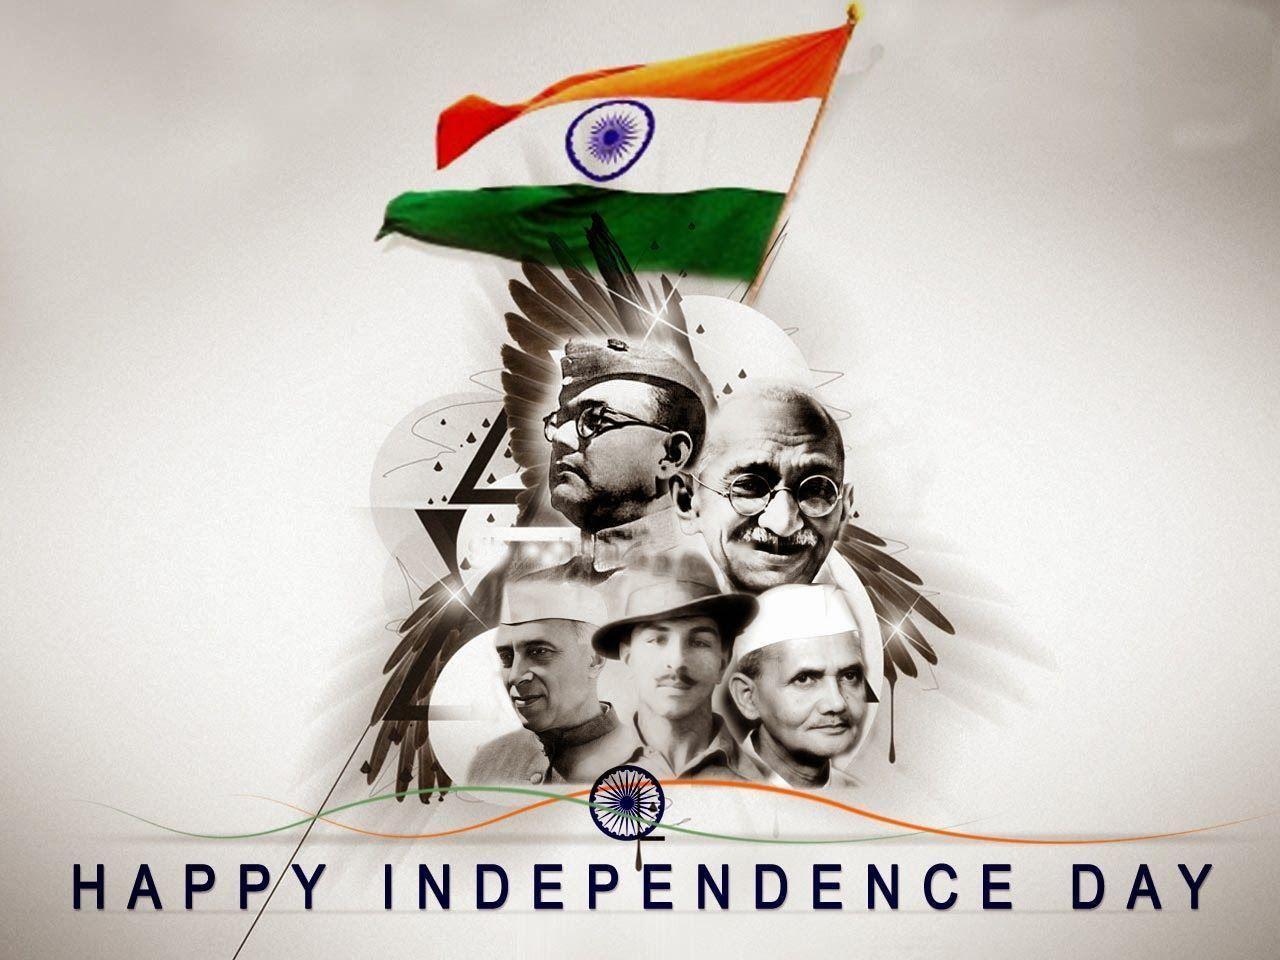 68th Independence Day of India 2014 Image, Photo and Wallpaper